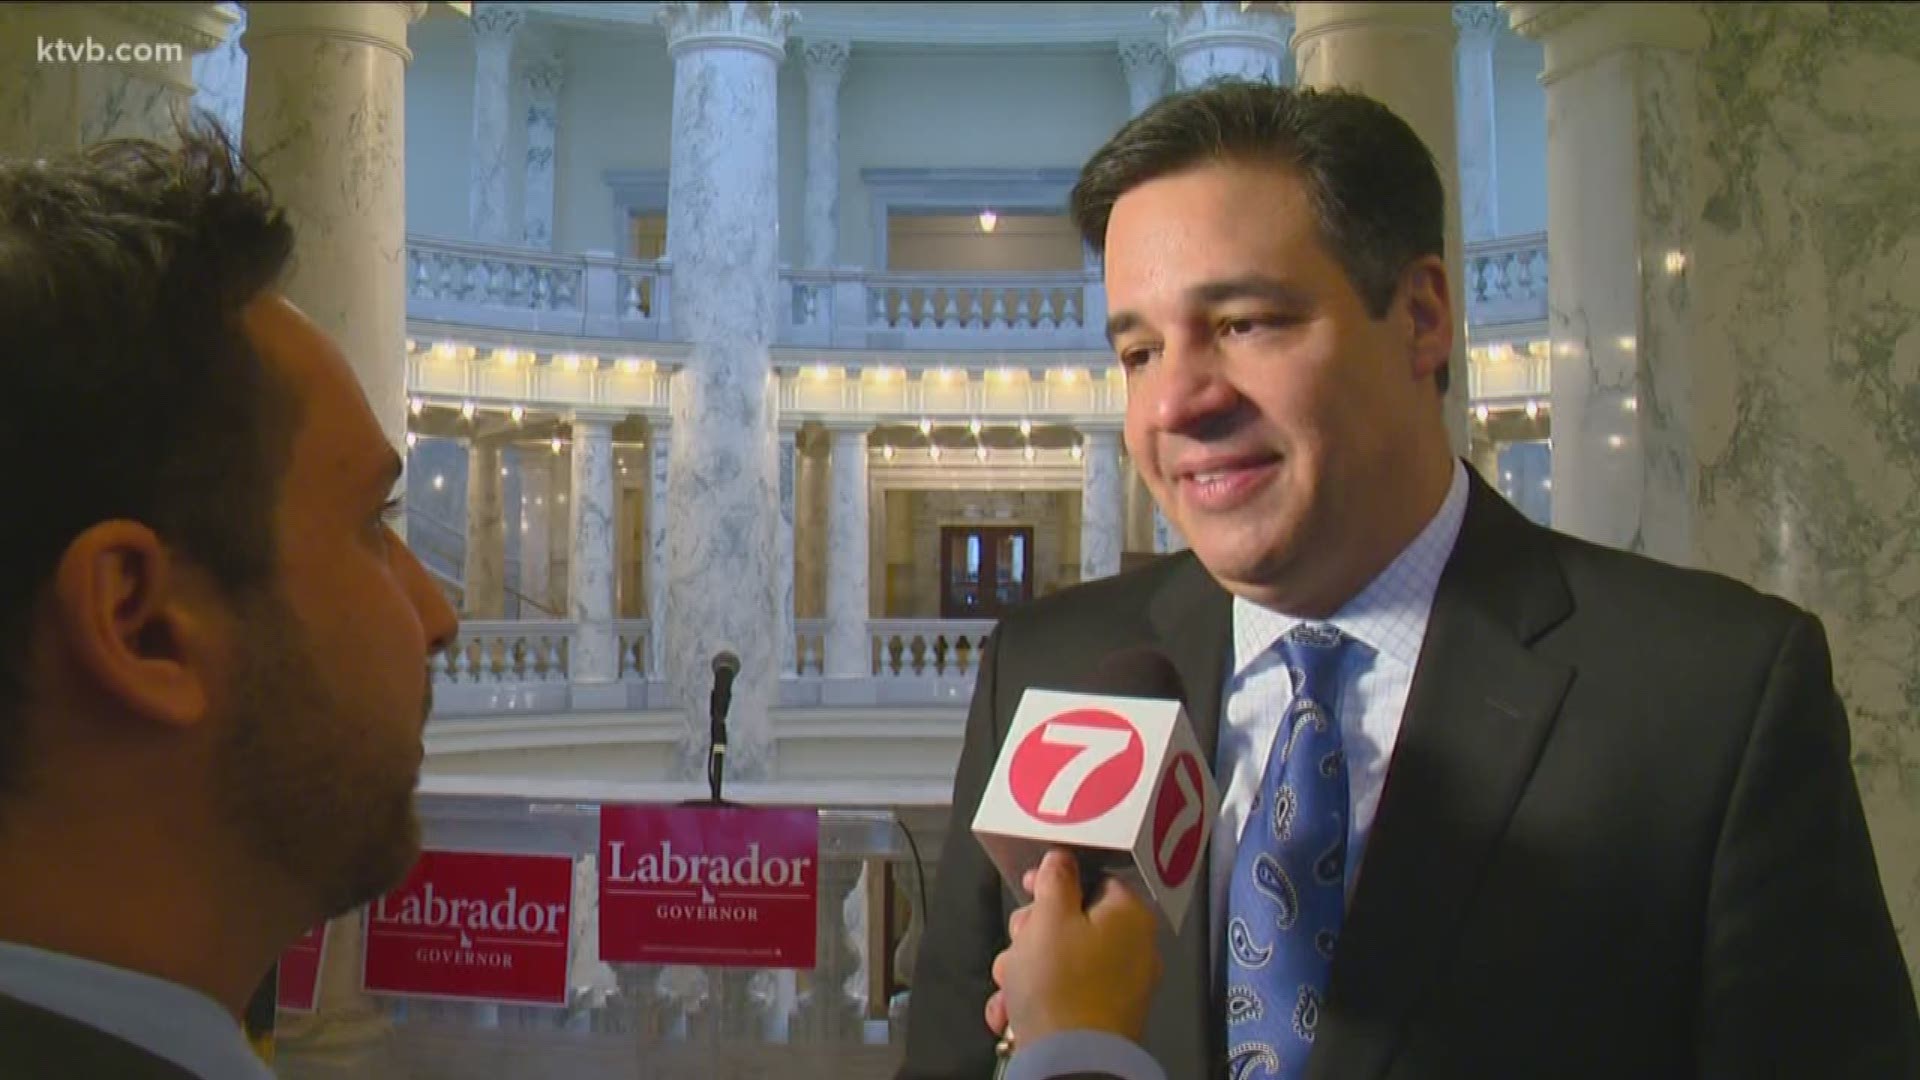 We fact checked the campaign ad that targets Congressman Raul Labrador.